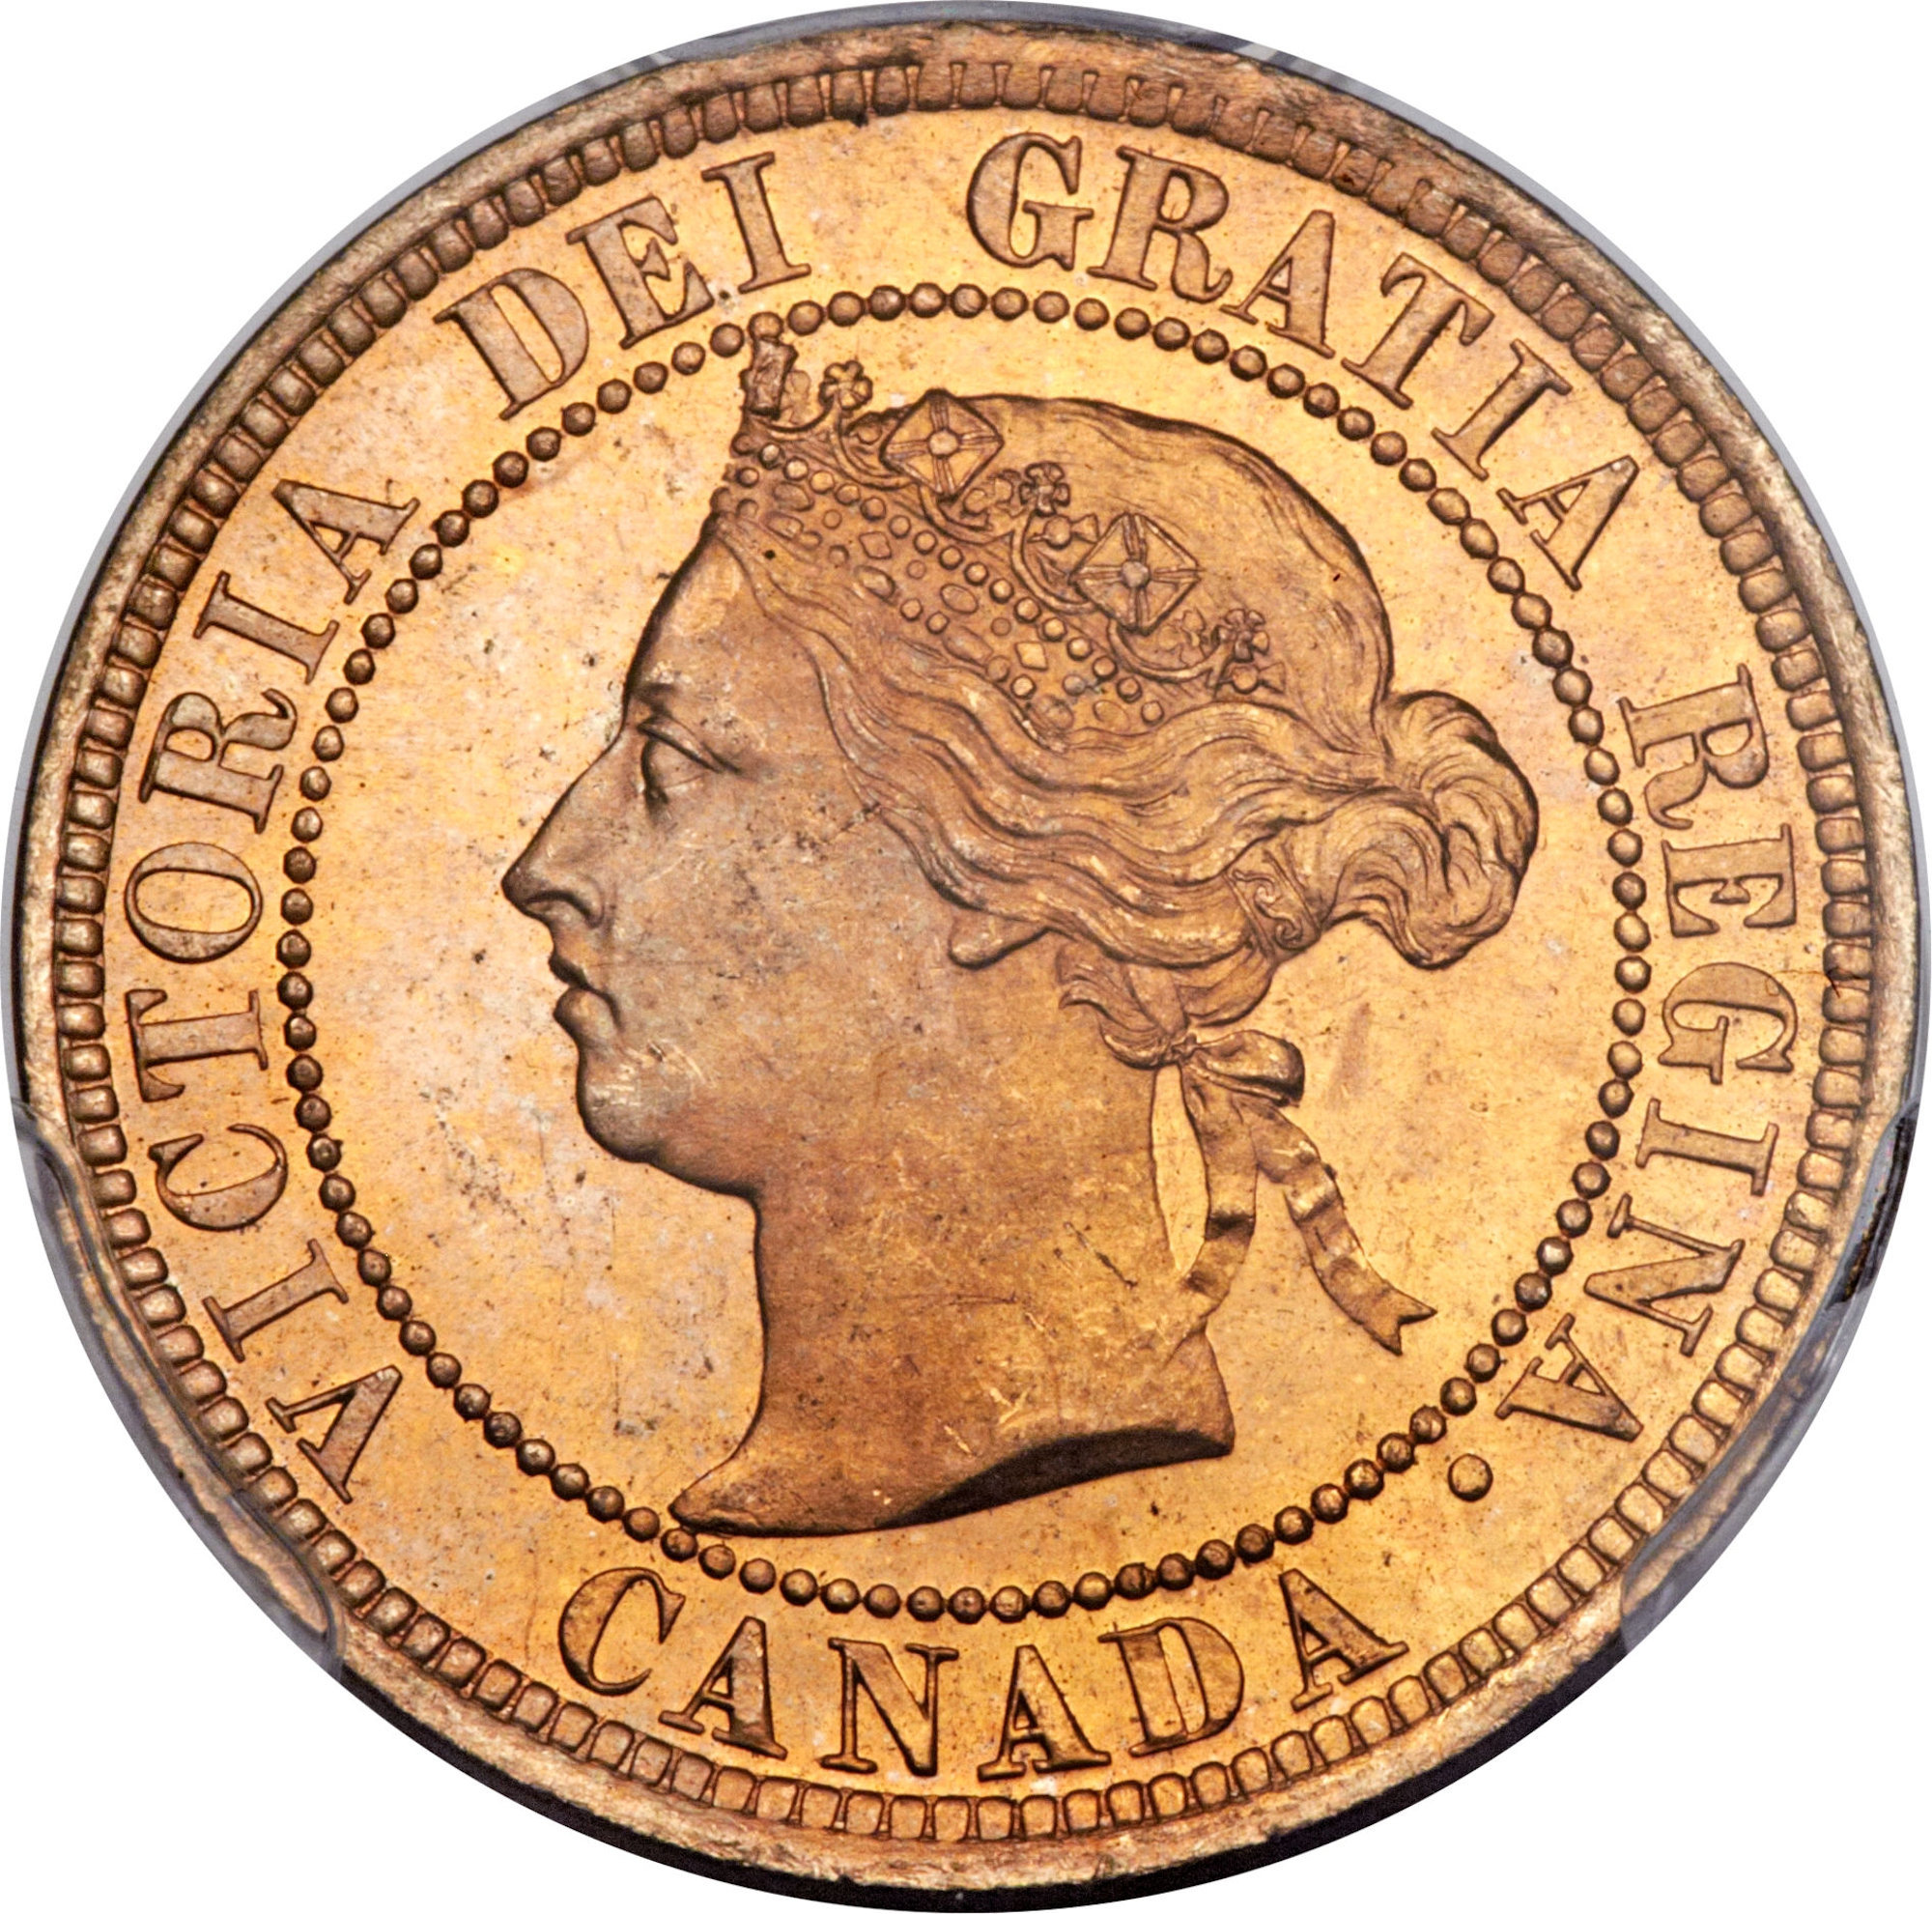 Queen Victoria Very Fine 1899 Large Cent Canadian Pennies Select What You Want